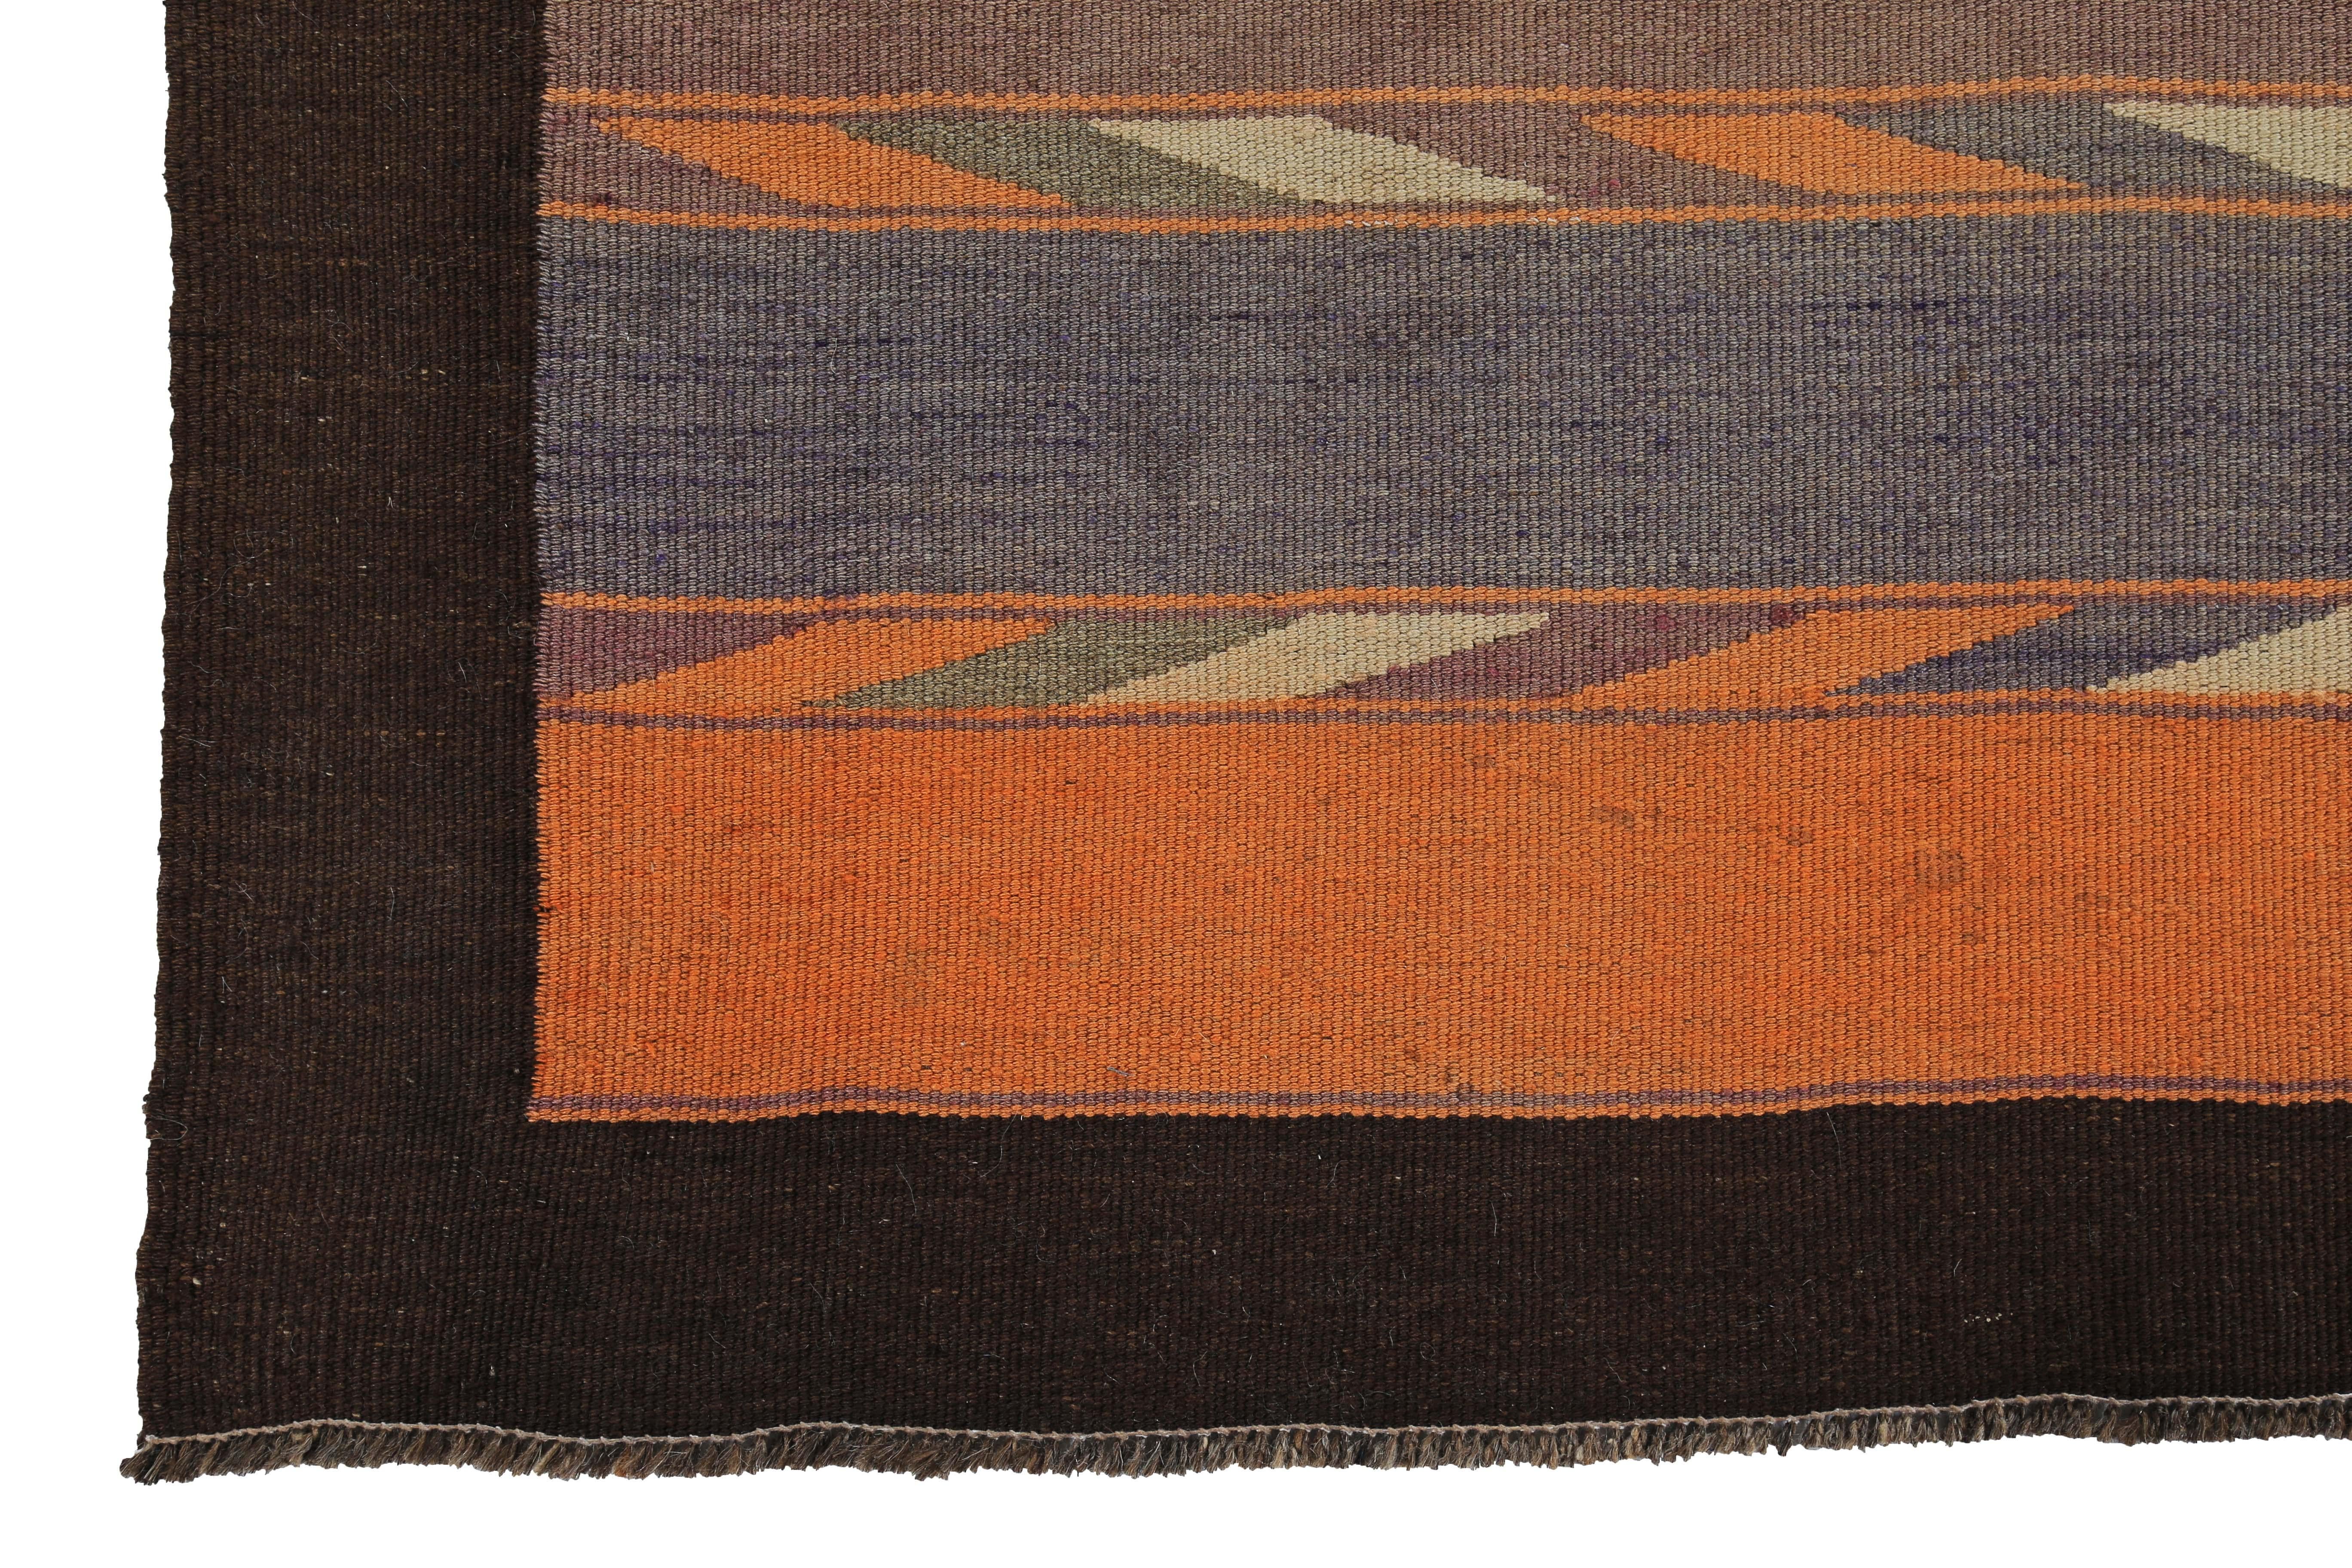 Hand-Woven Modern Turkish Kilim Runner Rug with Orange, Purple and Brown Tribal Stripes For Sale